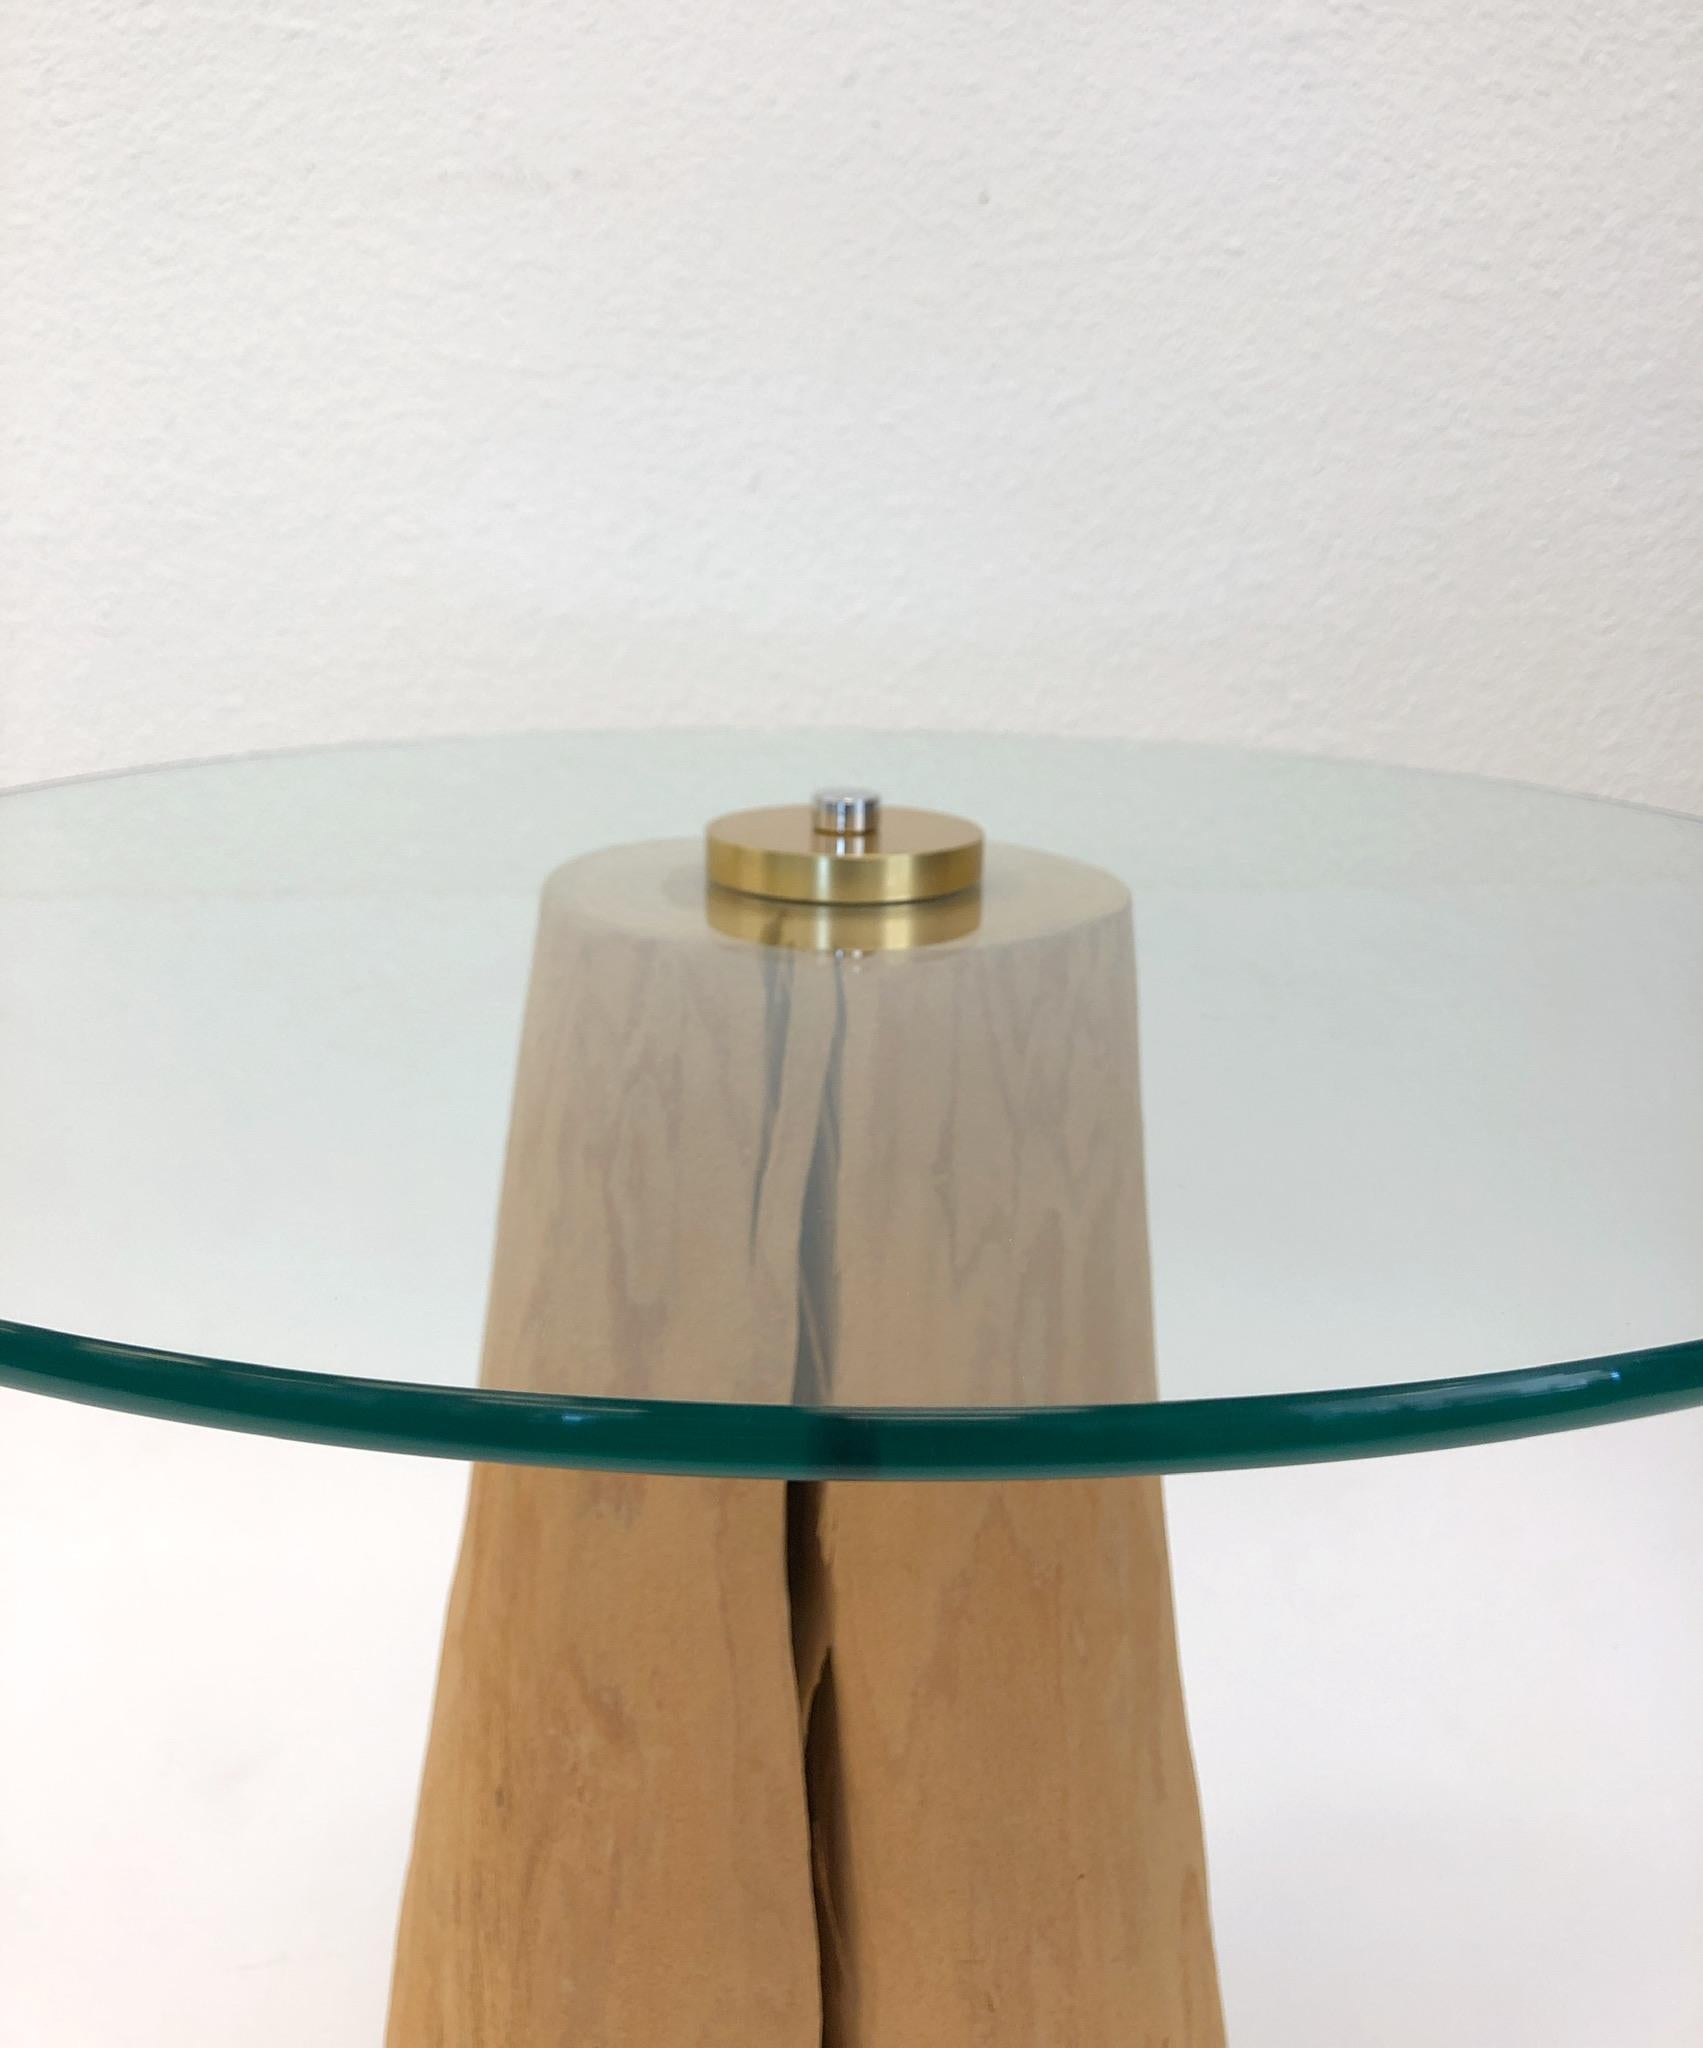 A beautiful 1970s wood stump with a round glass top side table by Michele Taylor. The table is in original condition. The hardware that holds the 3/8” thick glass top to the stump is chrome and gold.
Dimension: 24” diameter, 18.25” high.